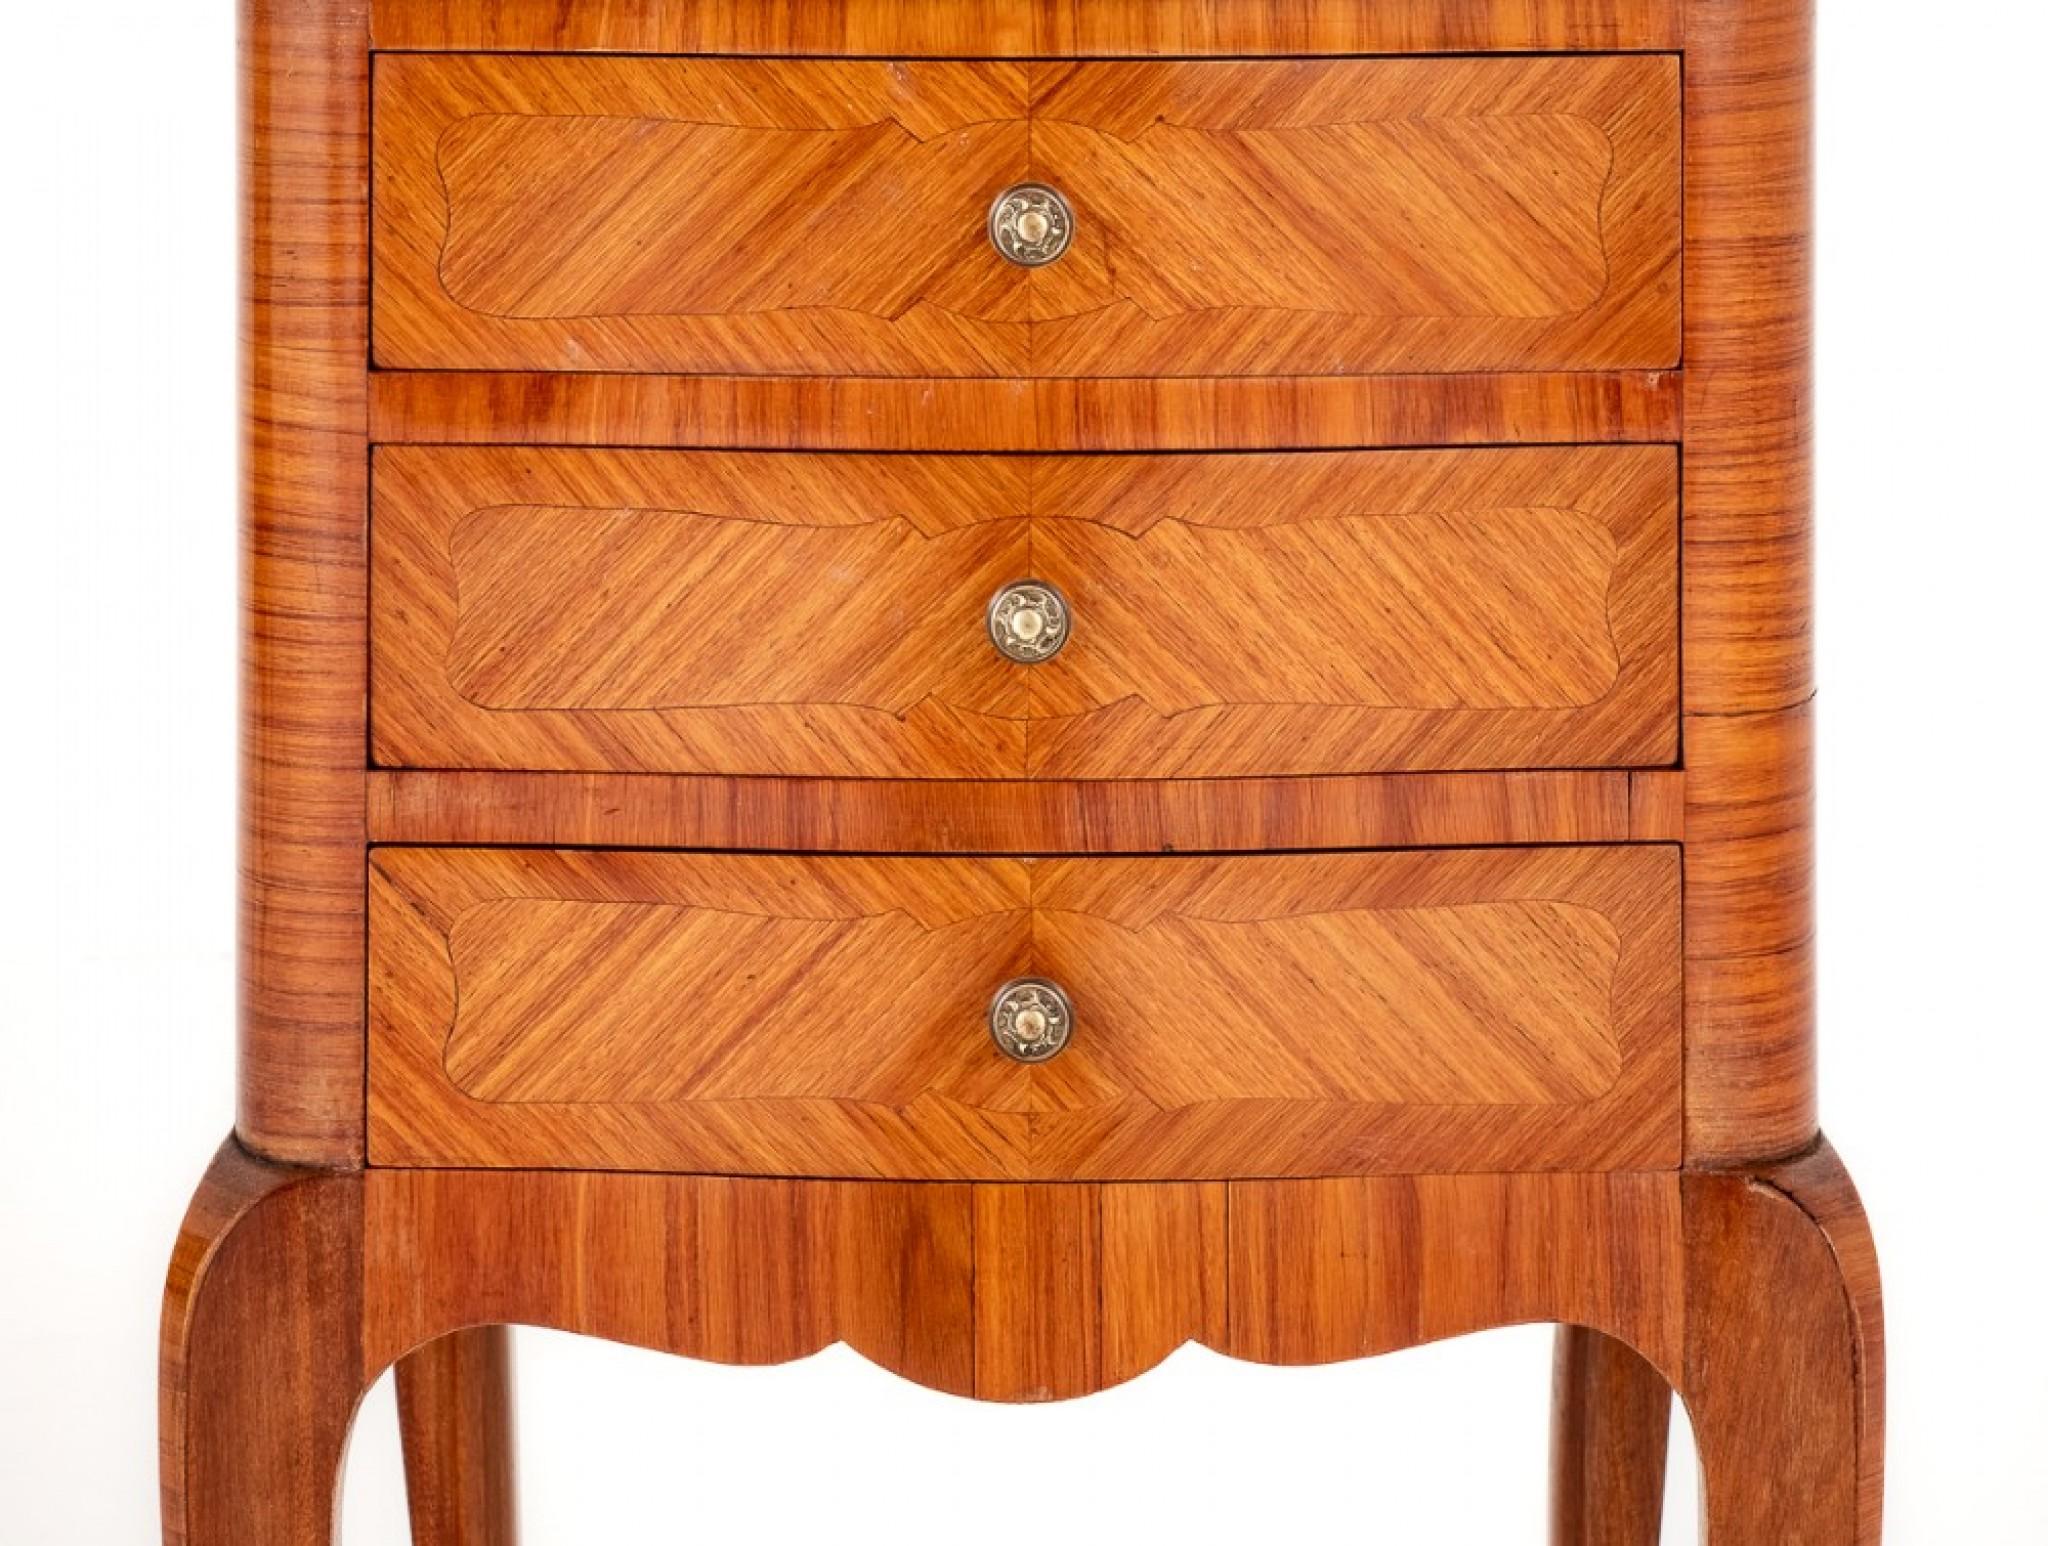 This pretty pair of French satinwood bedside cabinets standing upon shaped legs with decorative toes.
1 cabinet features 3 oak lined drawers the other cabinet having 1 drawer and a useful space below.
The veneers to the fronts being of a chevron